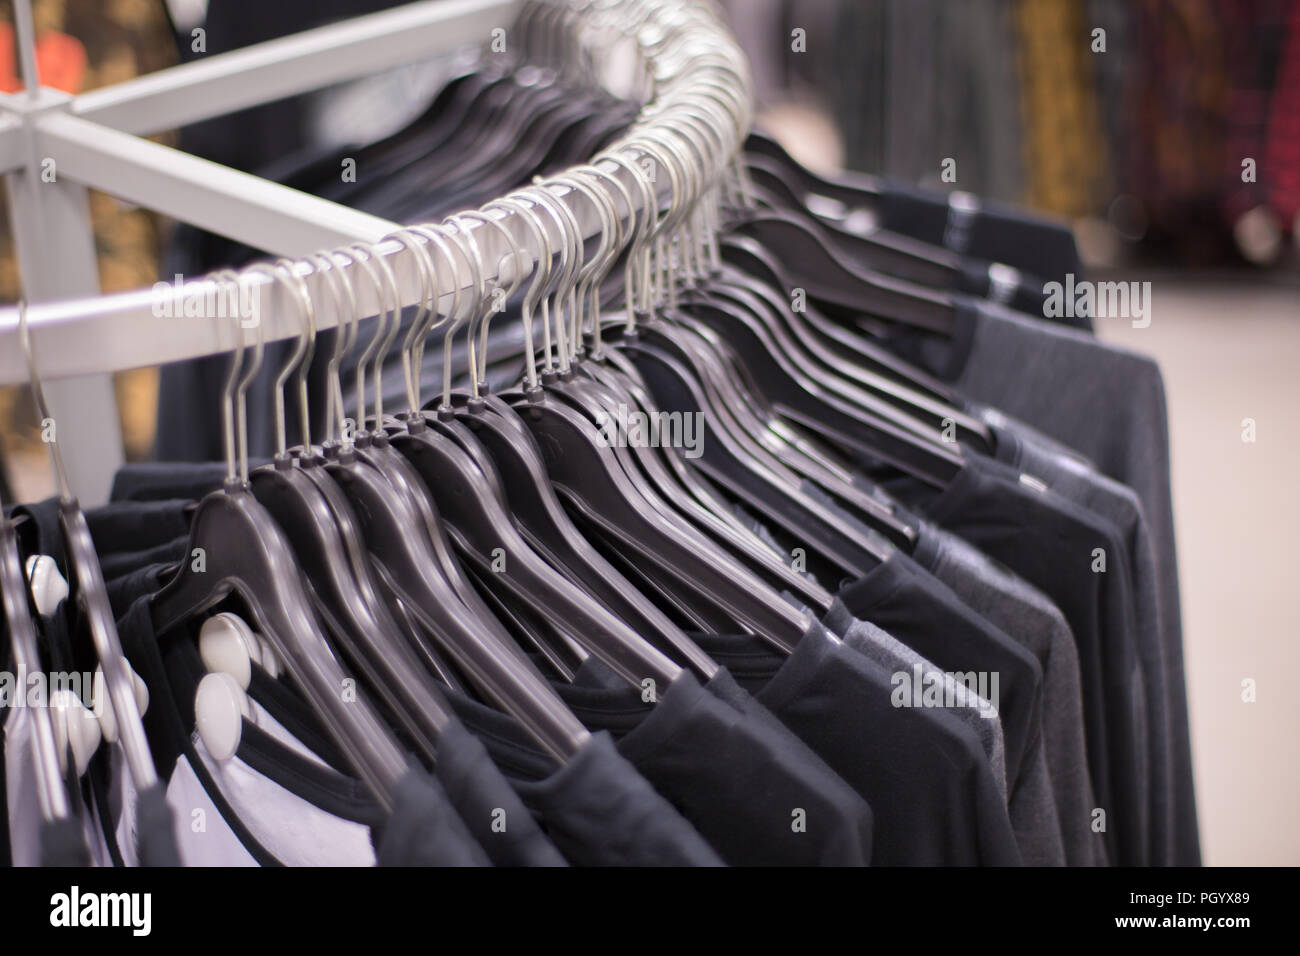 Hangers at a clothing store Stock Photo